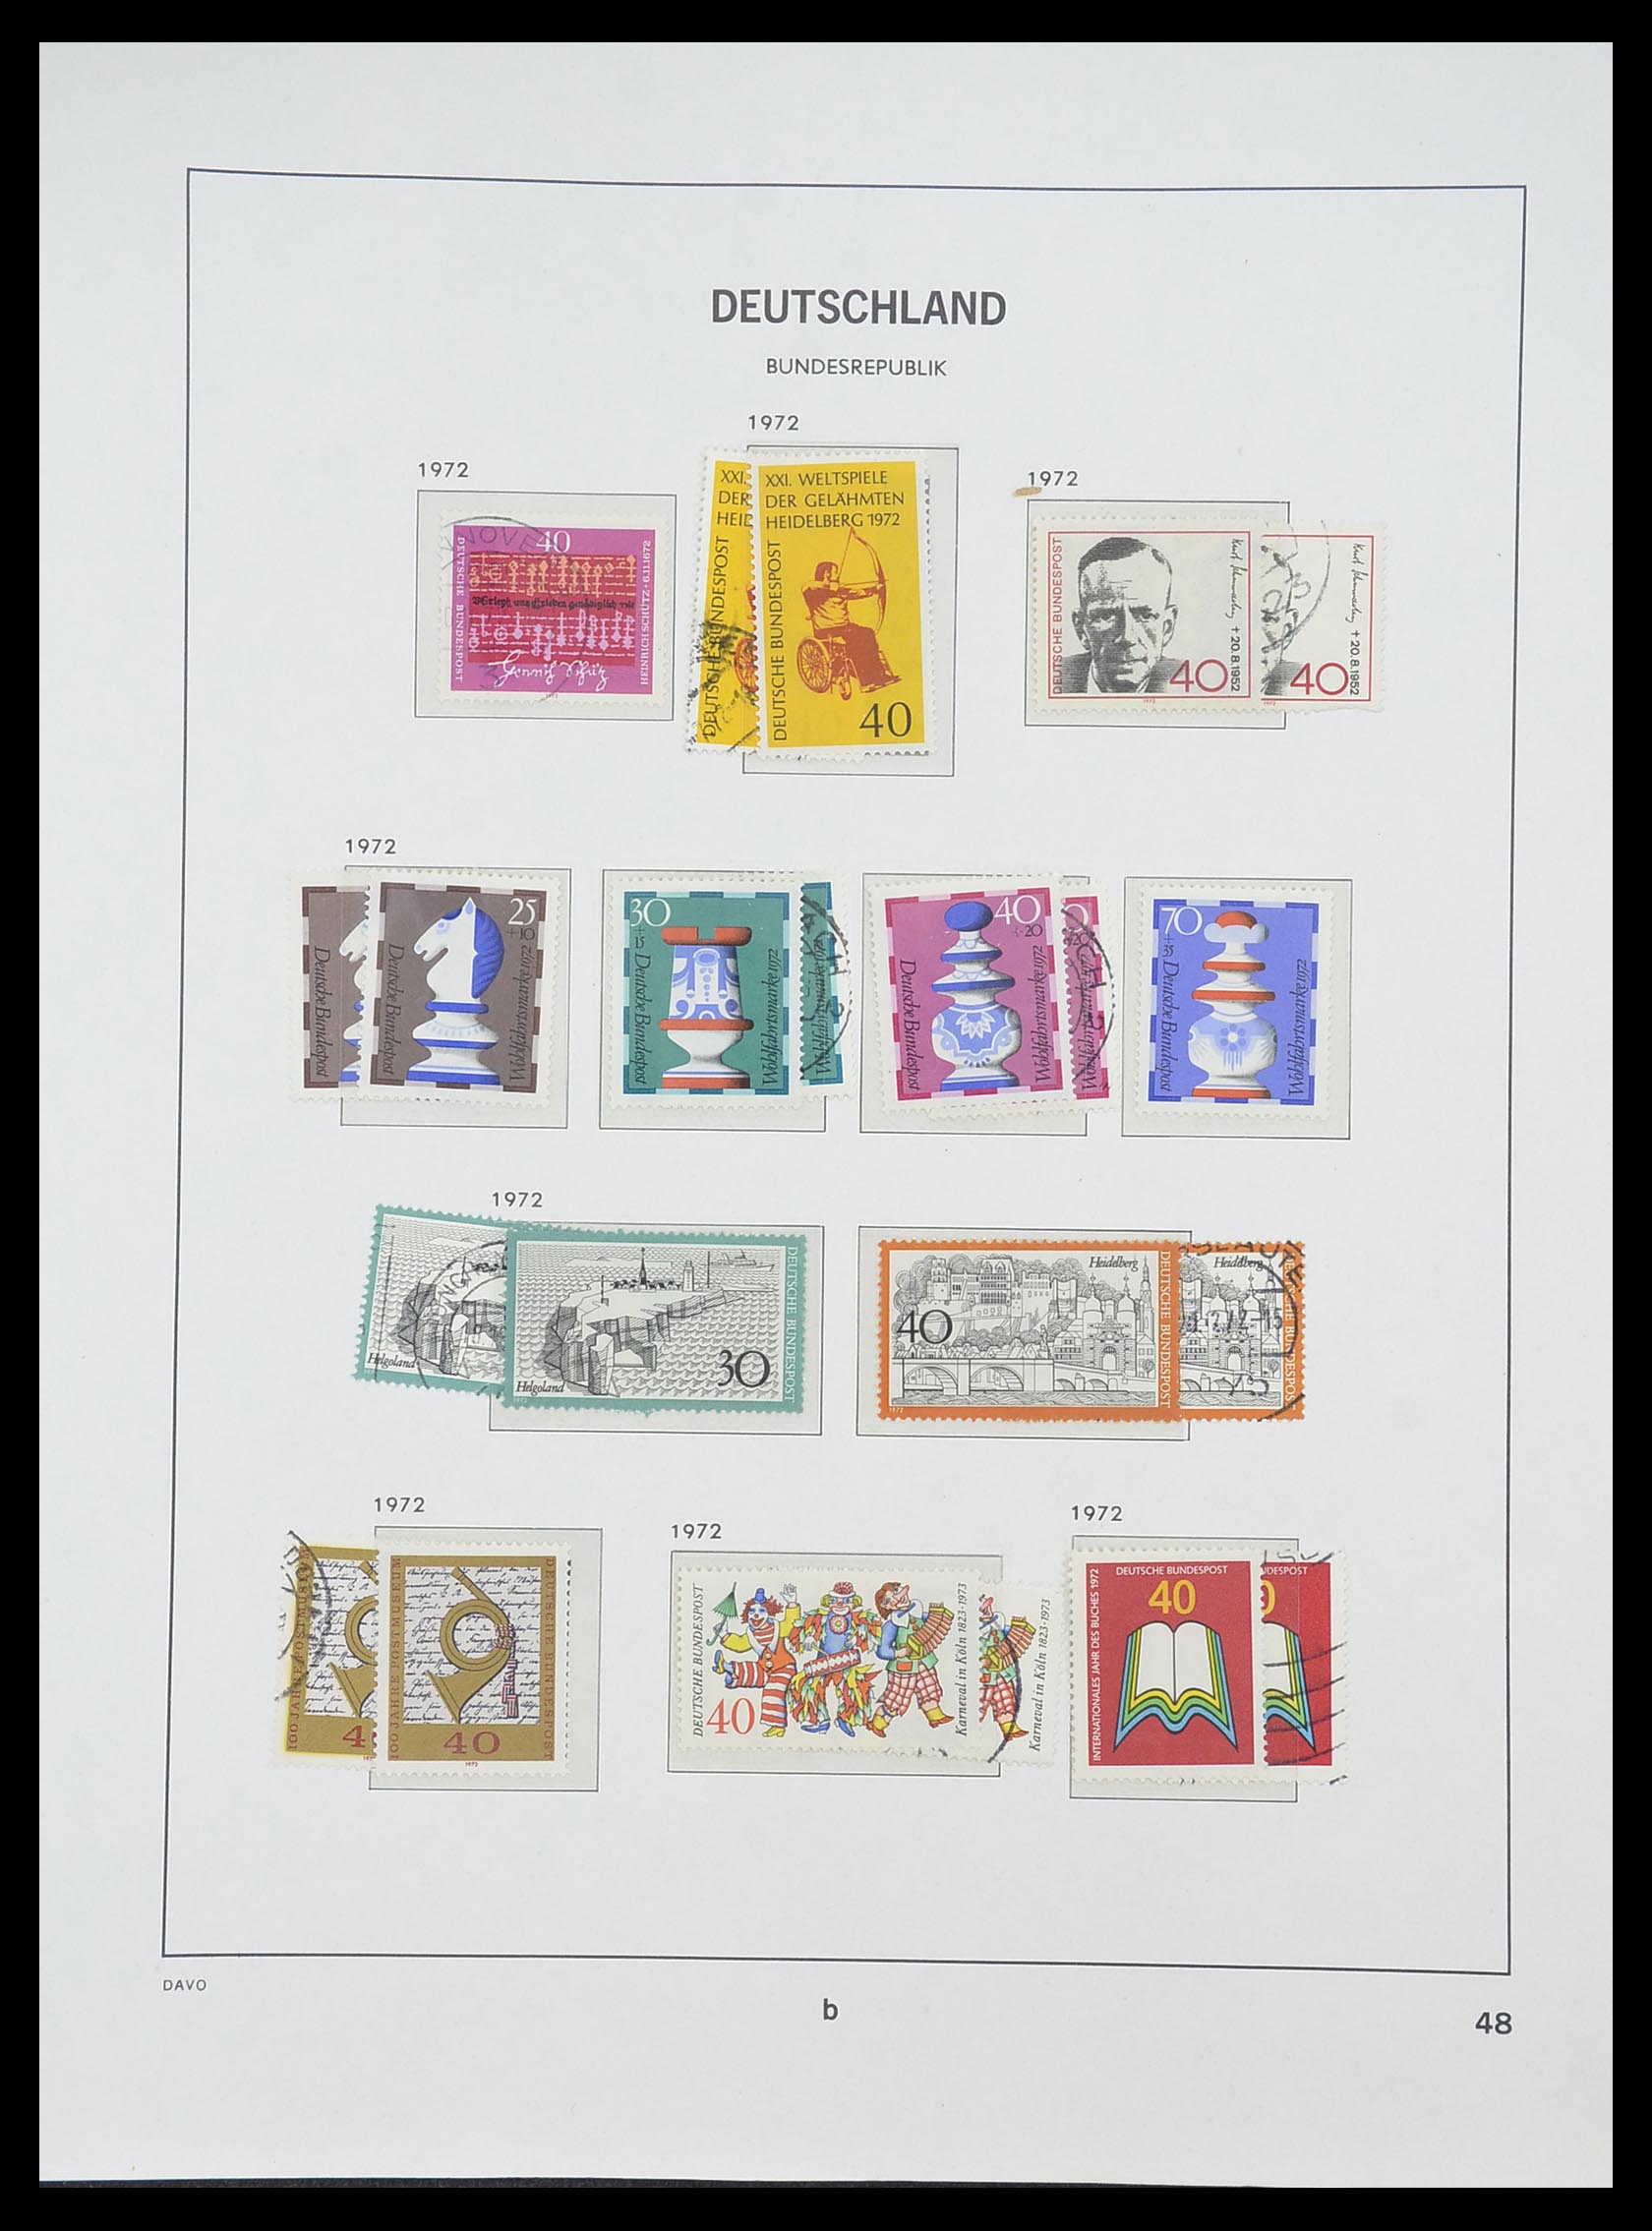 33954 052 - Stamp collection 33954 Bundespost and Berlin 1945-1972.